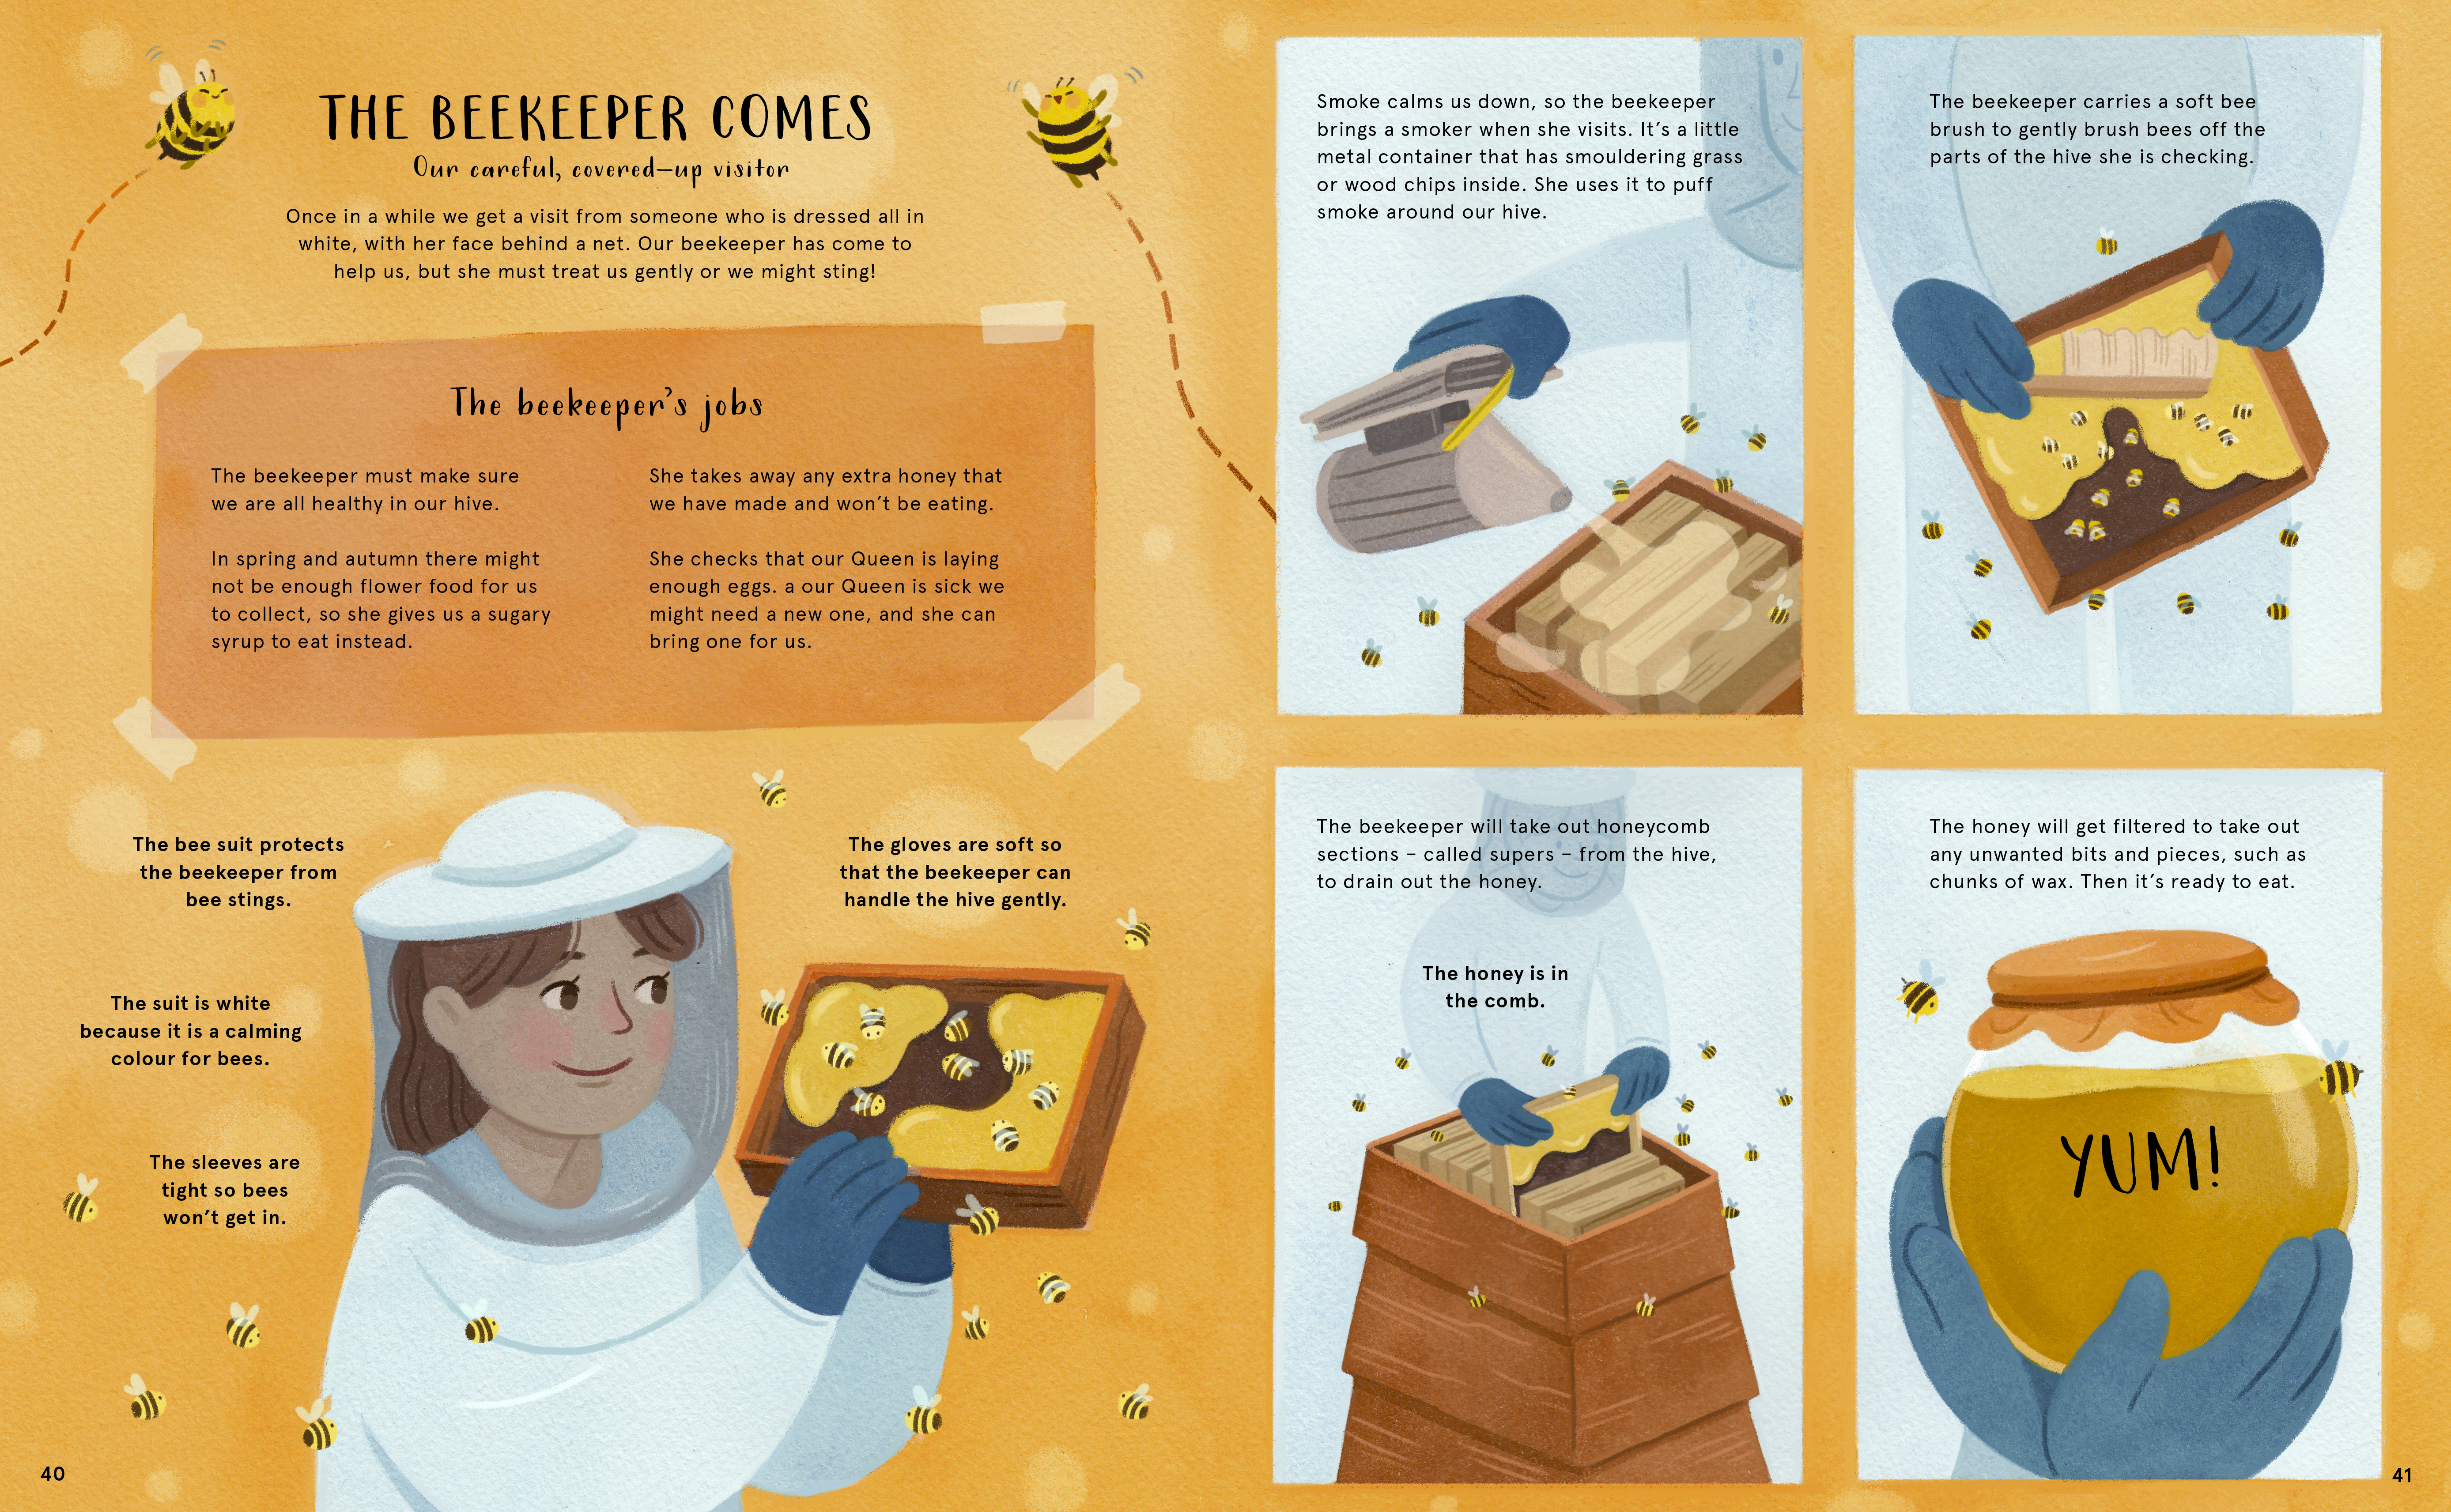 The Secret Life of Bees